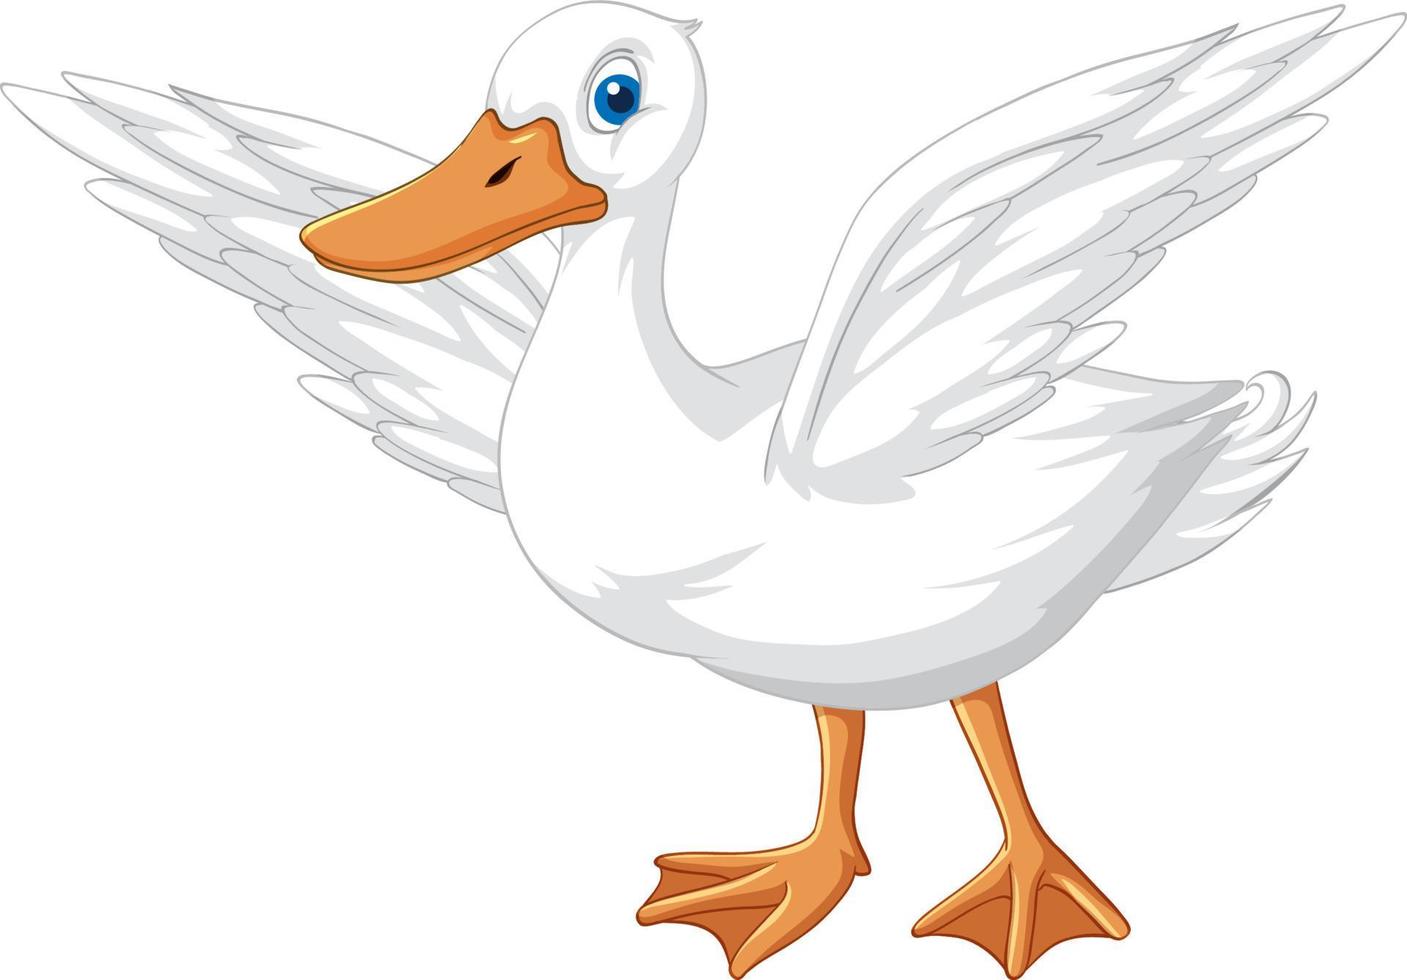 Little duck spreading wings on white ground vector